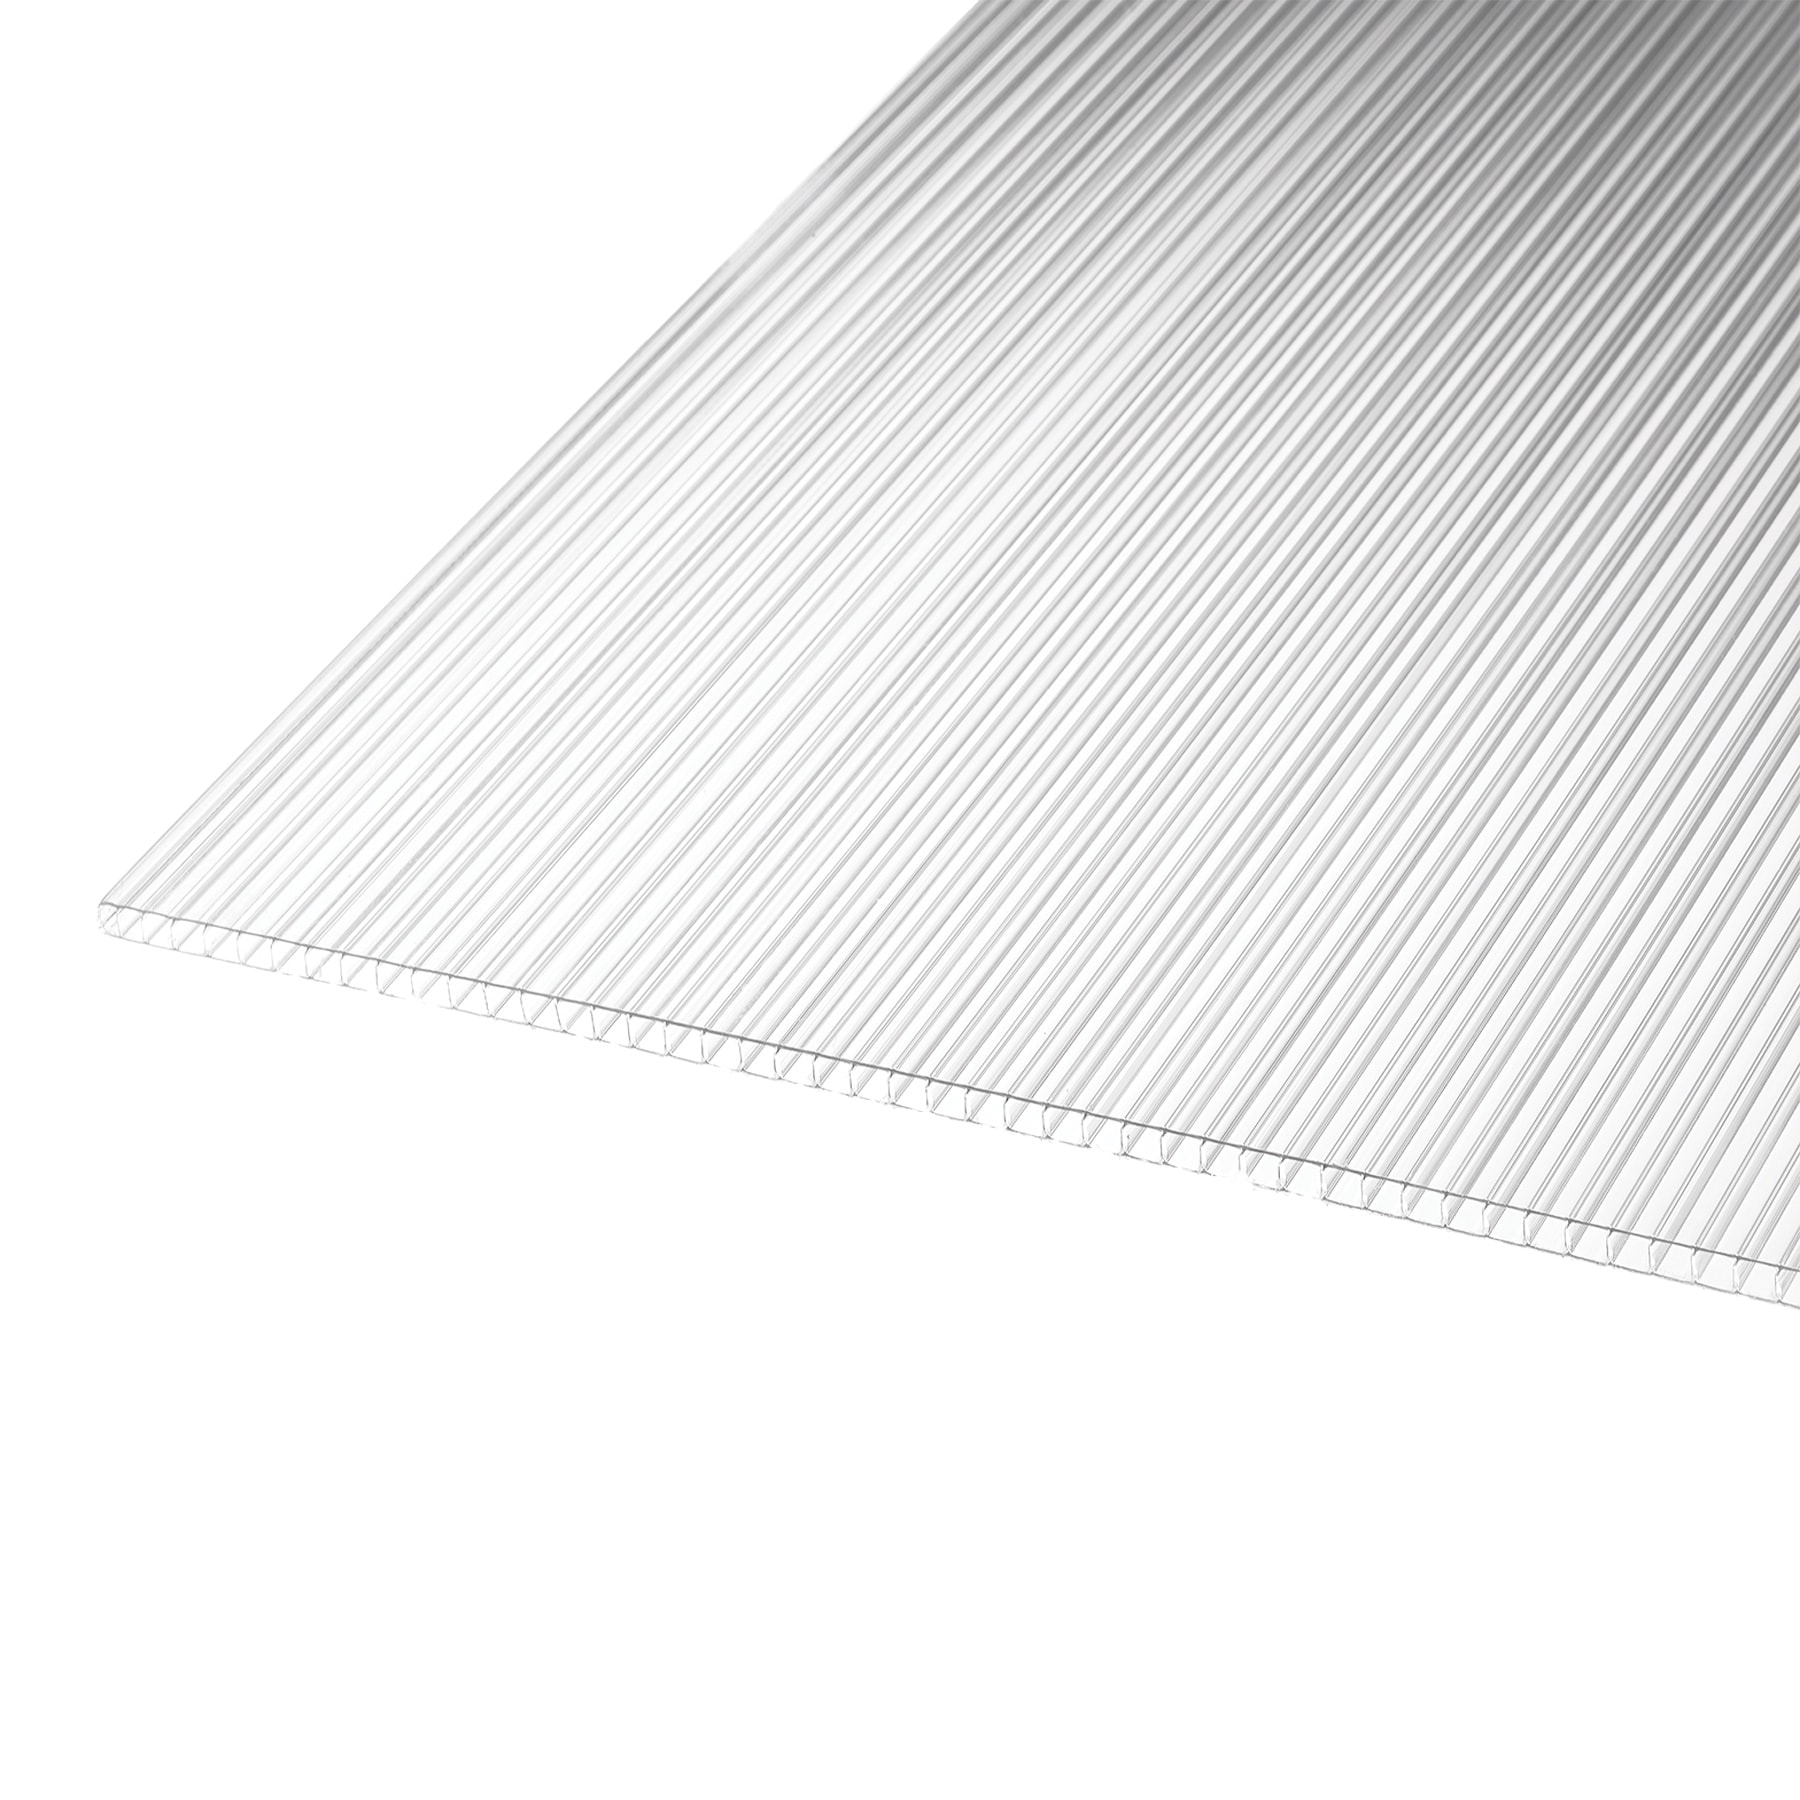 Sibe-R Plastic Supply ONE- POLYCARBONATE CLEAR PLASTIC SHEET 1/4 12 X 24  ^